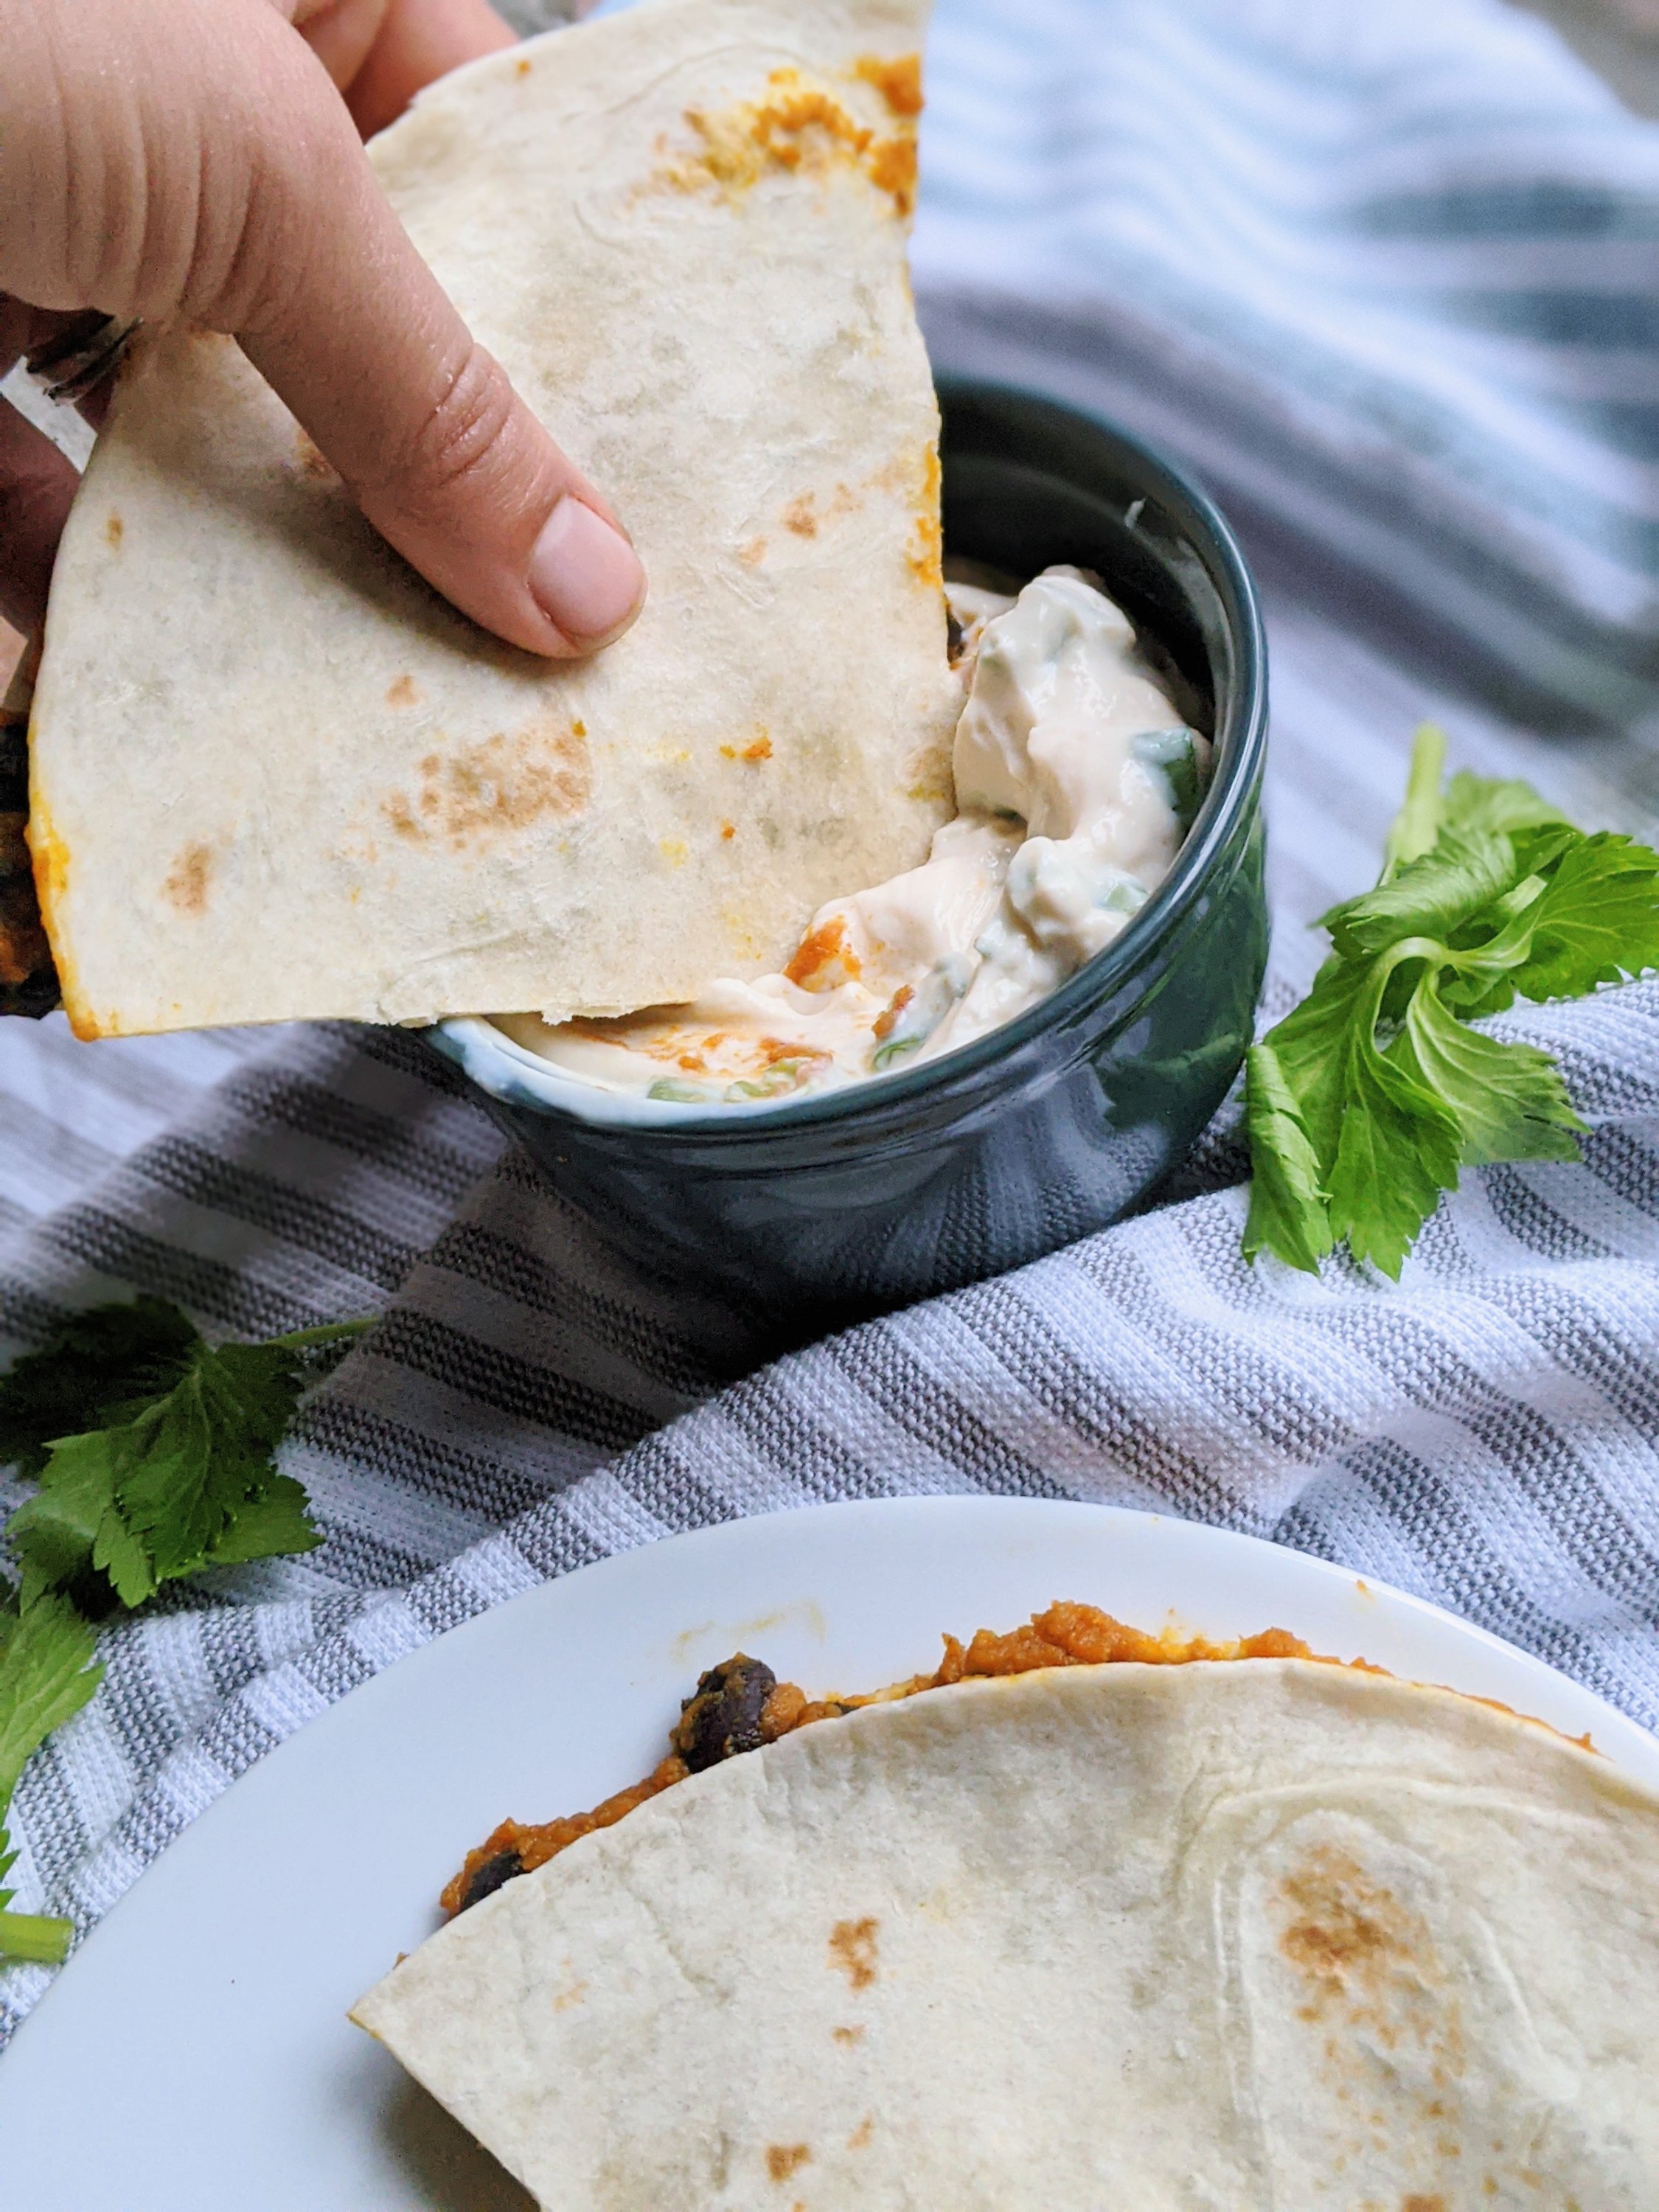 vegan quesadilla recipes with tofu sour cream made with silden tofu and green onions black bean quesadillas high protein vegetarian meals lunches to meal prep and make ahead